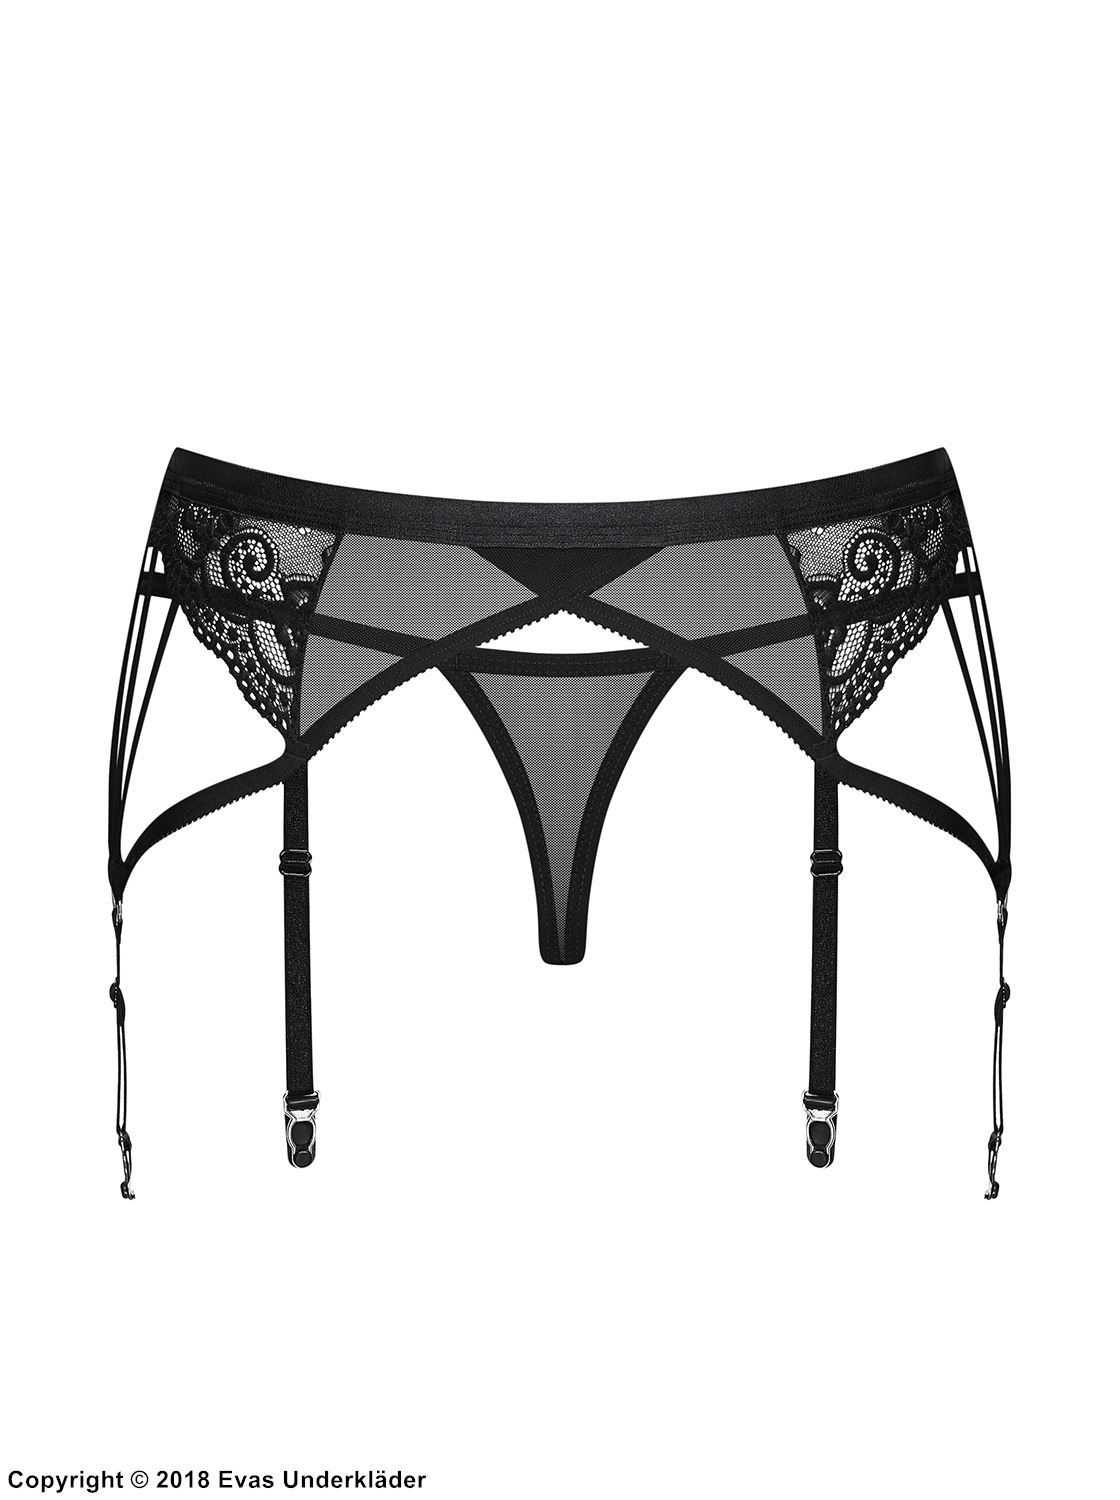 Garter belt and panty, lace, sheer inlays, thin straps